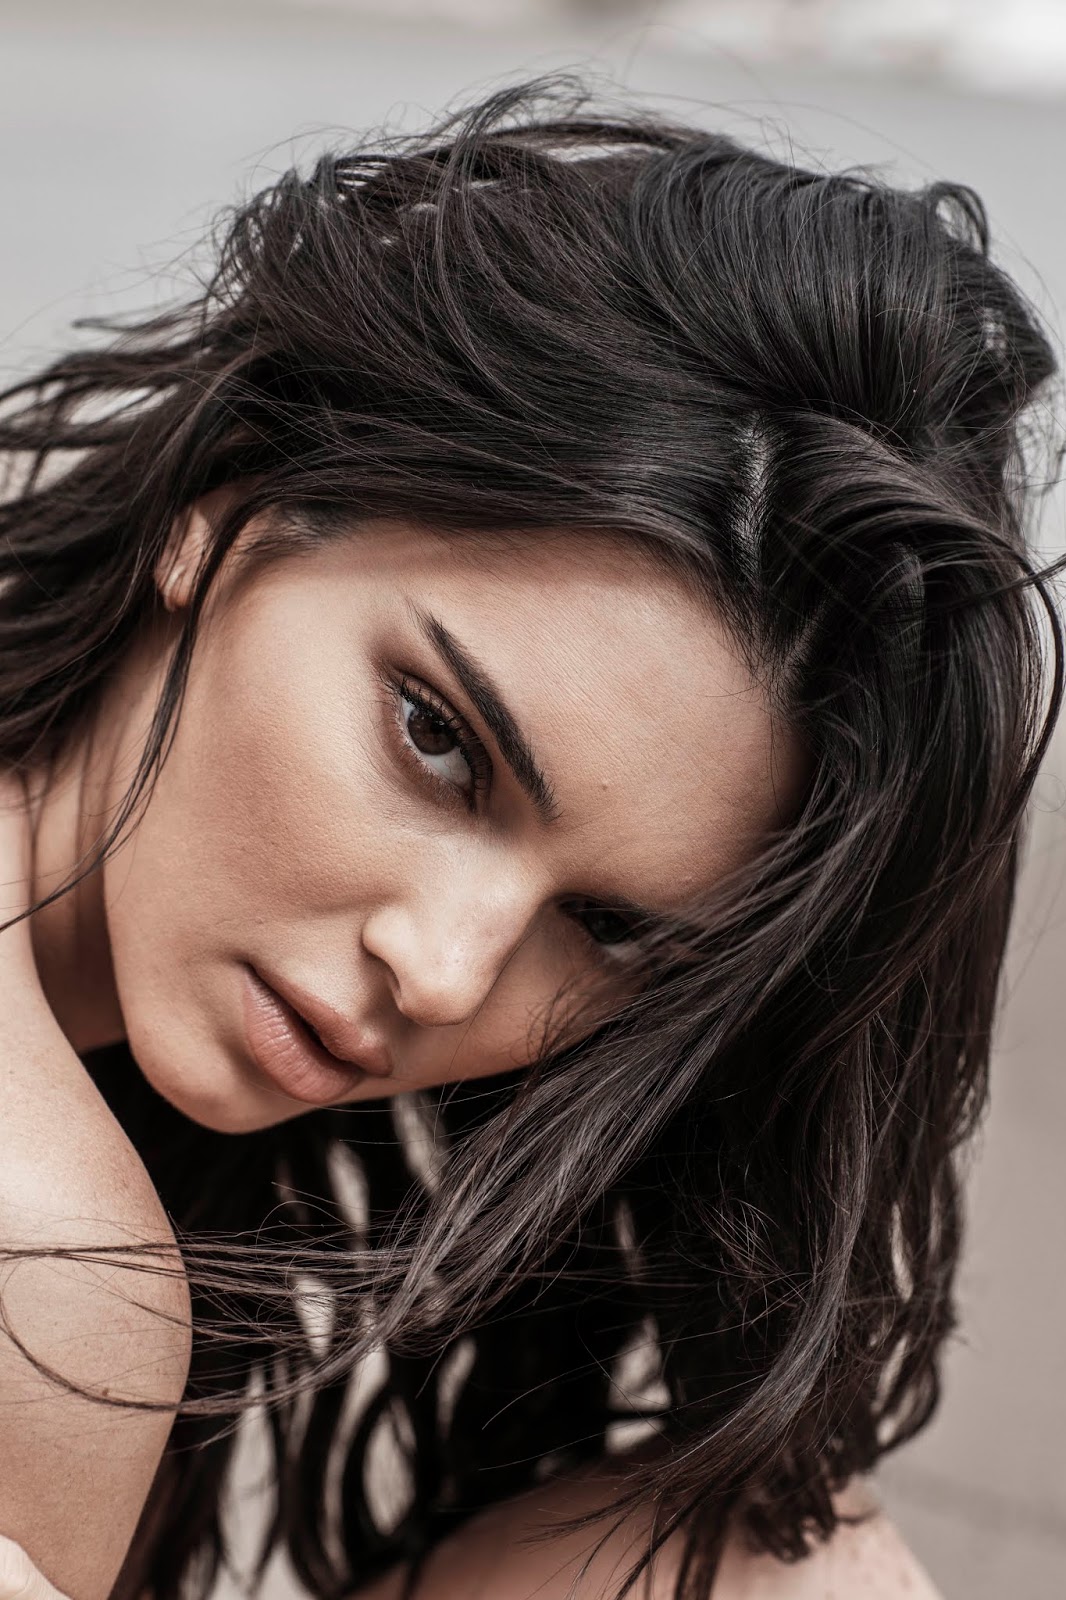 Kendall Jenner Nude Photoshoot By Russell James Celeb Central